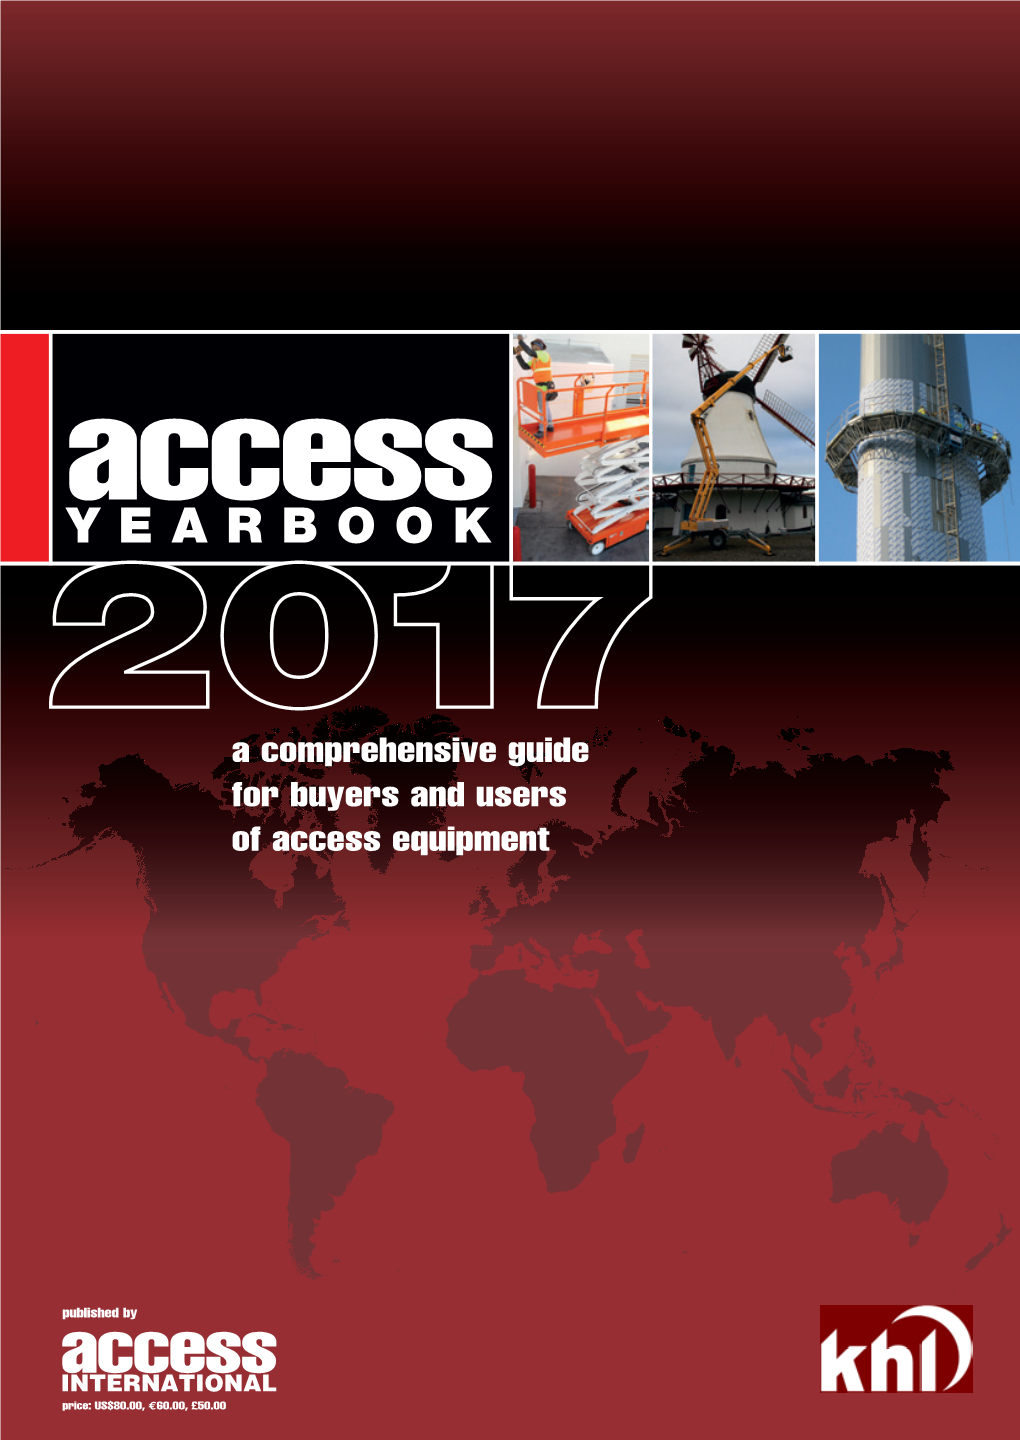 A Comprehensive Guide for Buyers and Users of Access Equipment